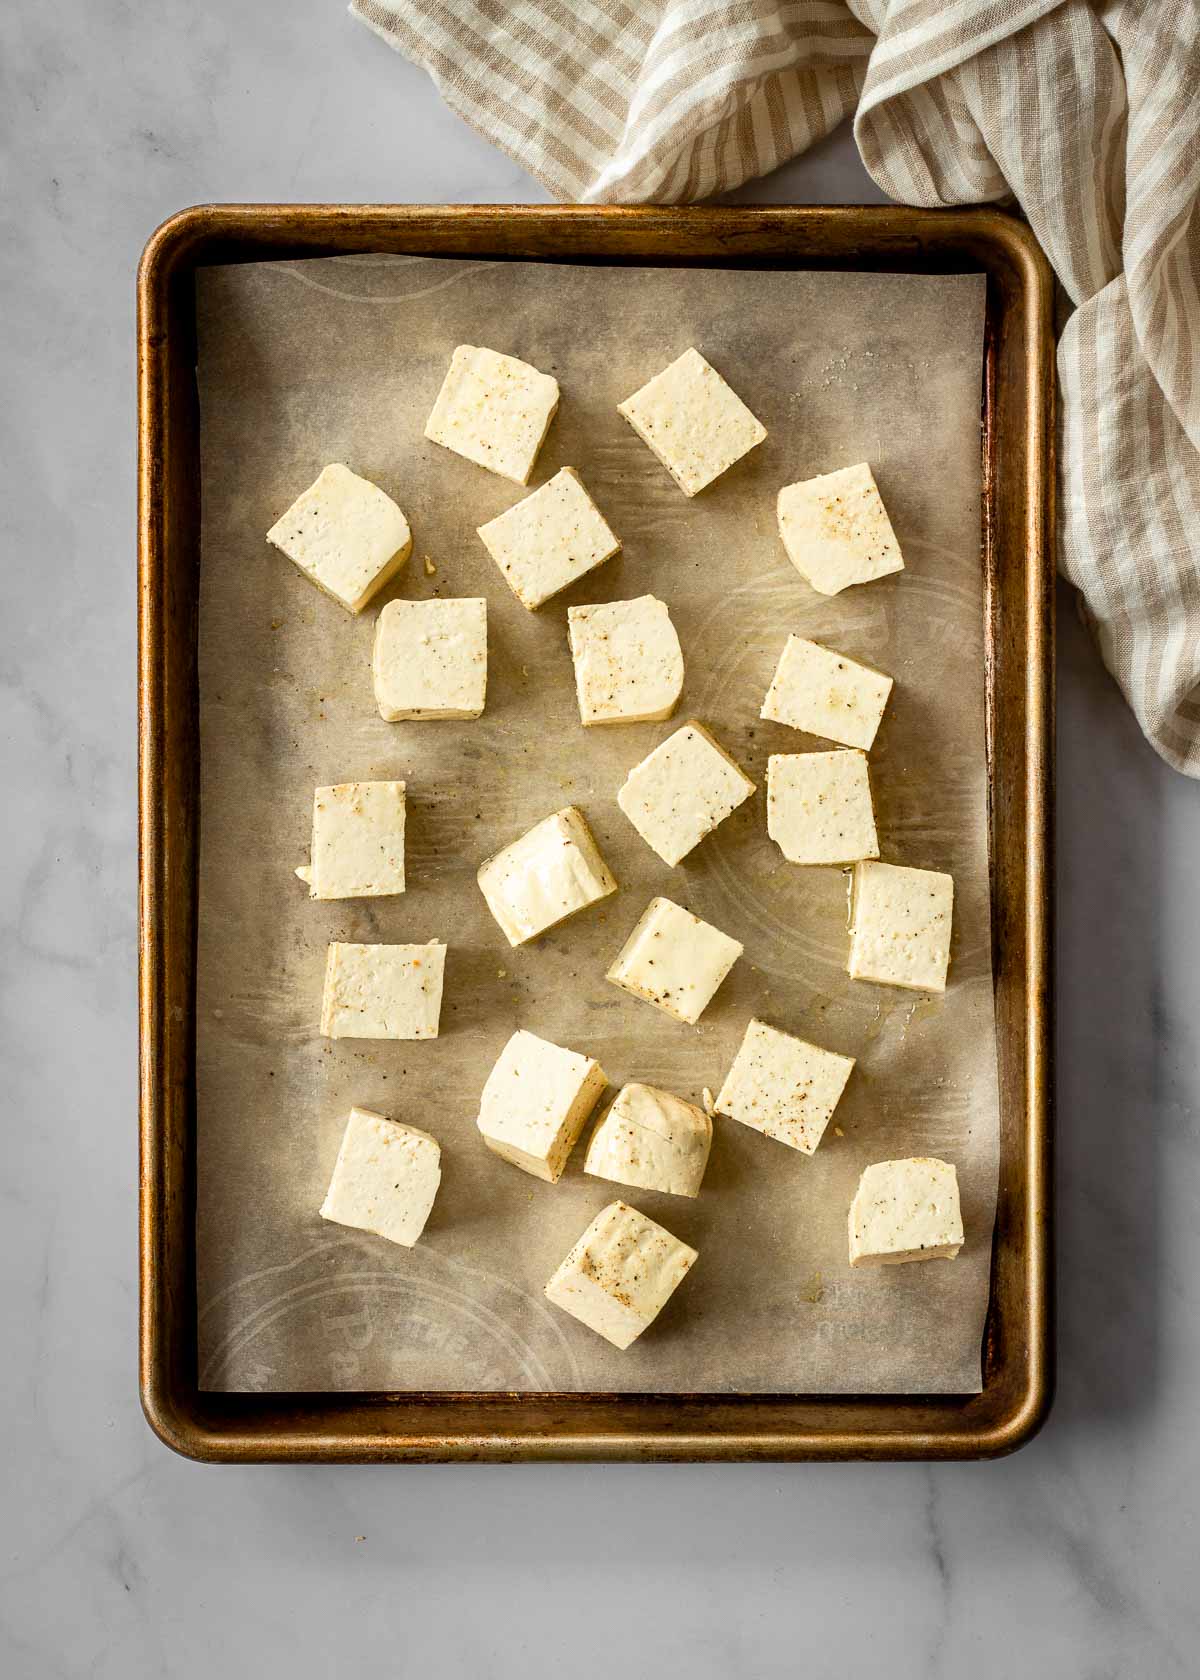 Uncooked tofu sits on a parchment-lined baking sheet.